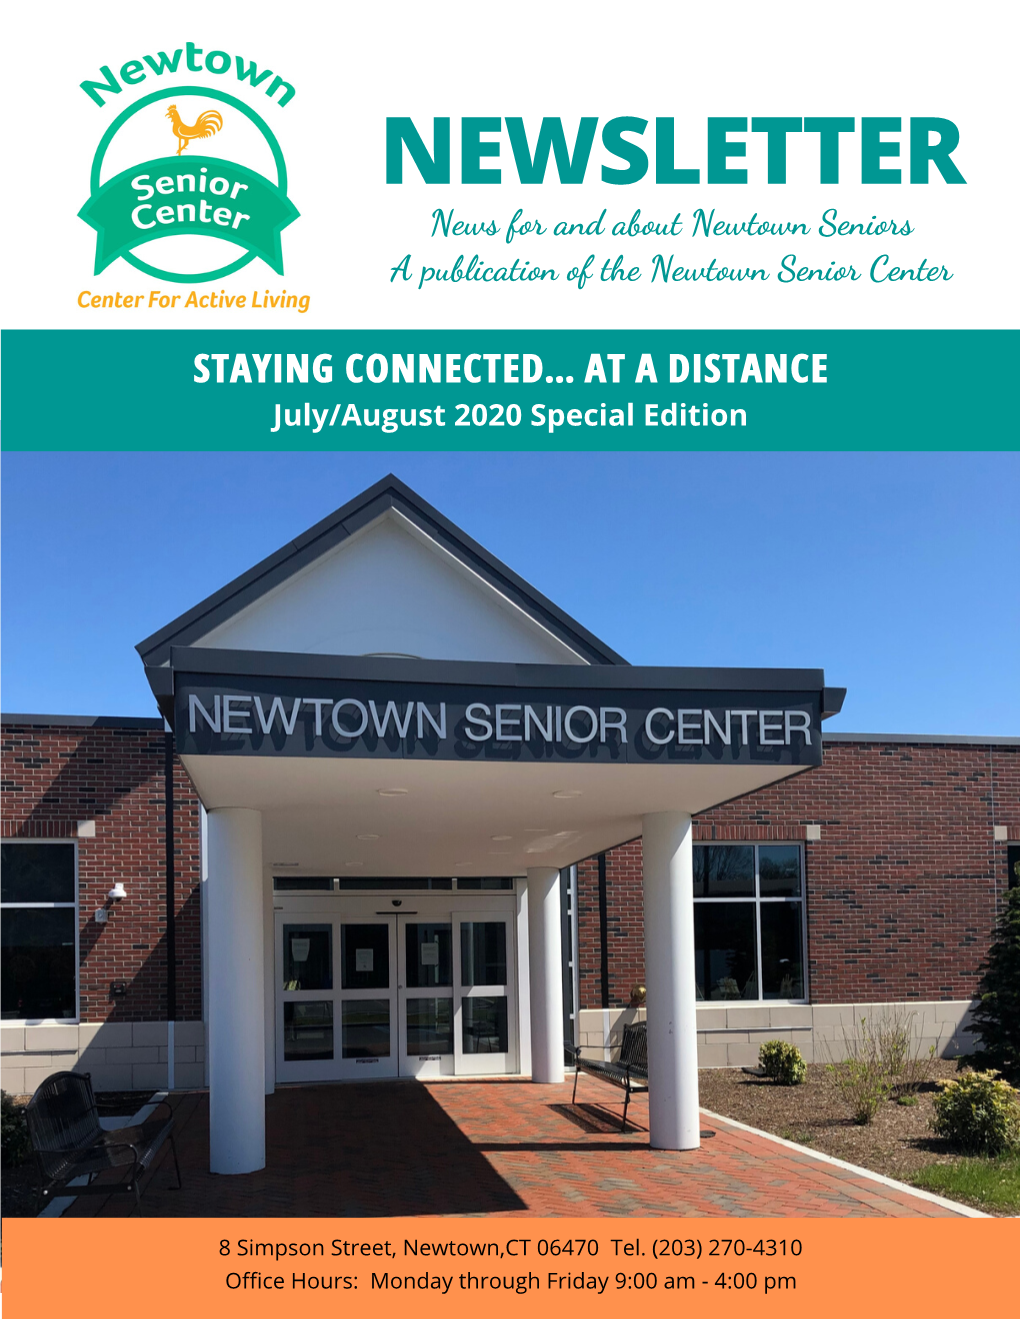 NEWSLETTER News for and About Newtown Seniors a Publication of the Newtown Senior Center